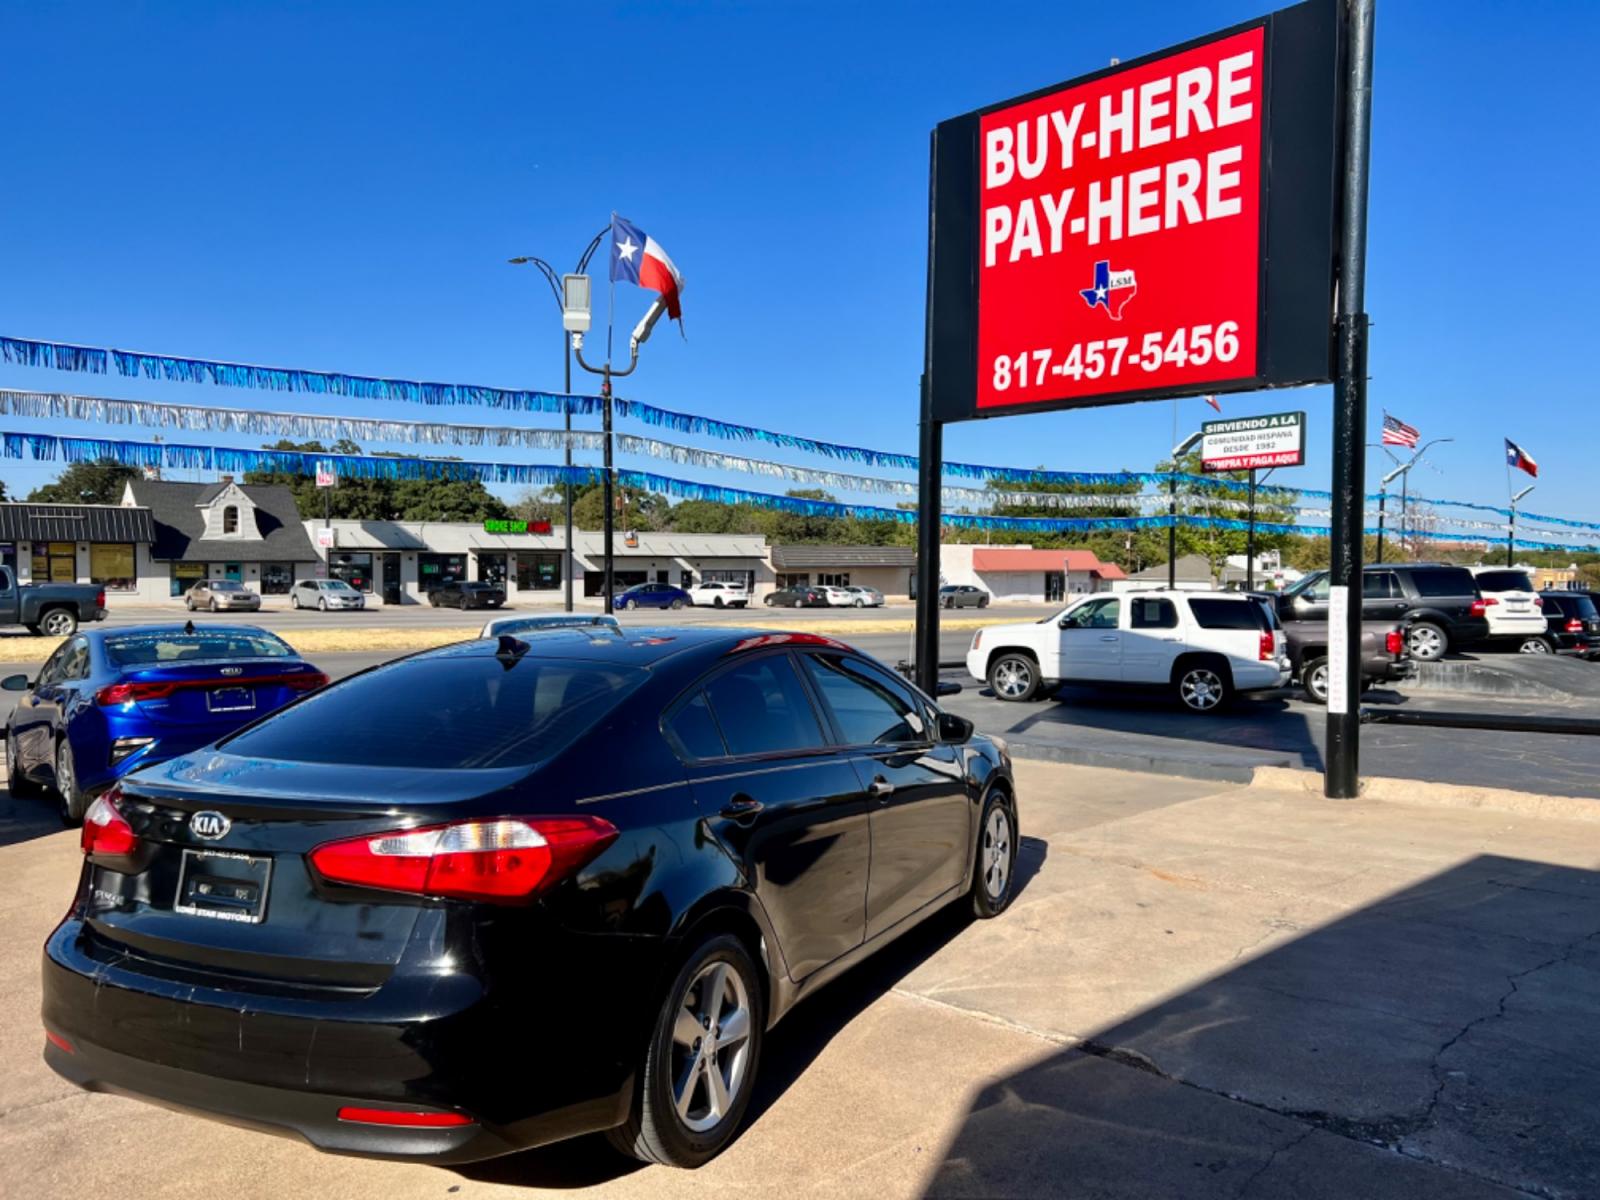 2016 BLACK KIA FORTE LX (KNAFK4A61G5) , located at 5900 E. Lancaster Ave., Fort Worth, TX, 76112, (817) 457-5456, 0.000000, 0.000000 - Cash CASH CAR ONLY, NO FINANCING AVAILABLE. THIS 2016 KIA FORTE LX 4 DOOR SEDAN RUNS AND DRIVES GREAT. IT IS EQUIPPED WITH A CD PLAYER, AM/FM RADIO AND AN AUX PORT. THE TIRES ARE IN GOOD CONDITION AND STILL HAVE TREAD LEFT ON THEM. THIS CAR WILL NOT LAST SO ACT FAST! Call or text Frances a - Photo #6